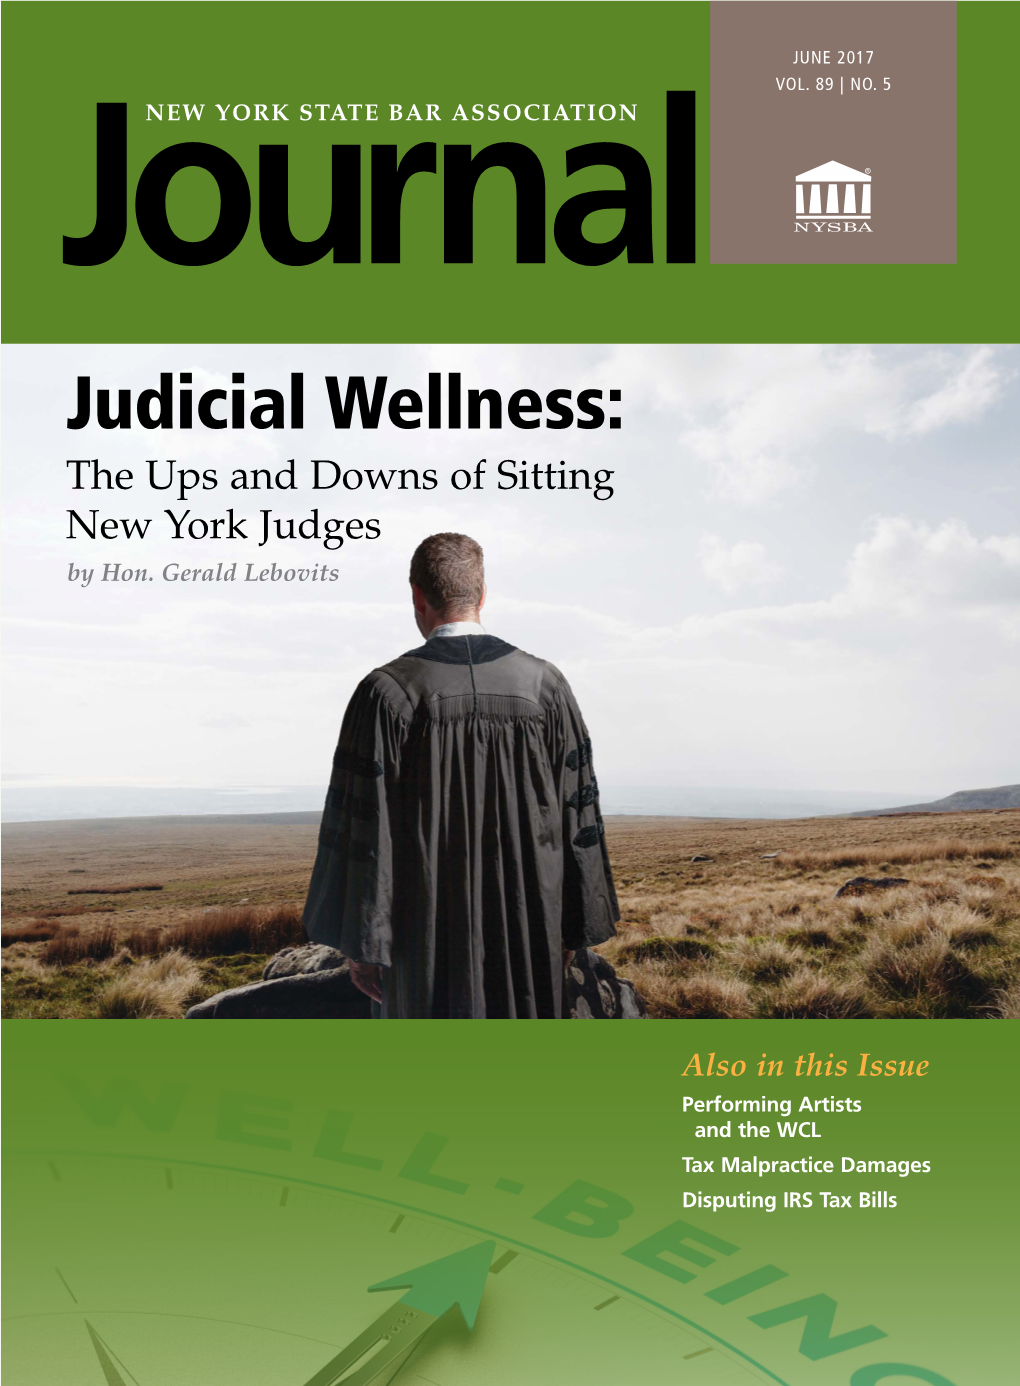 Judicial Wellness: the Ups and Downs of Sitting New York Judges by Hon